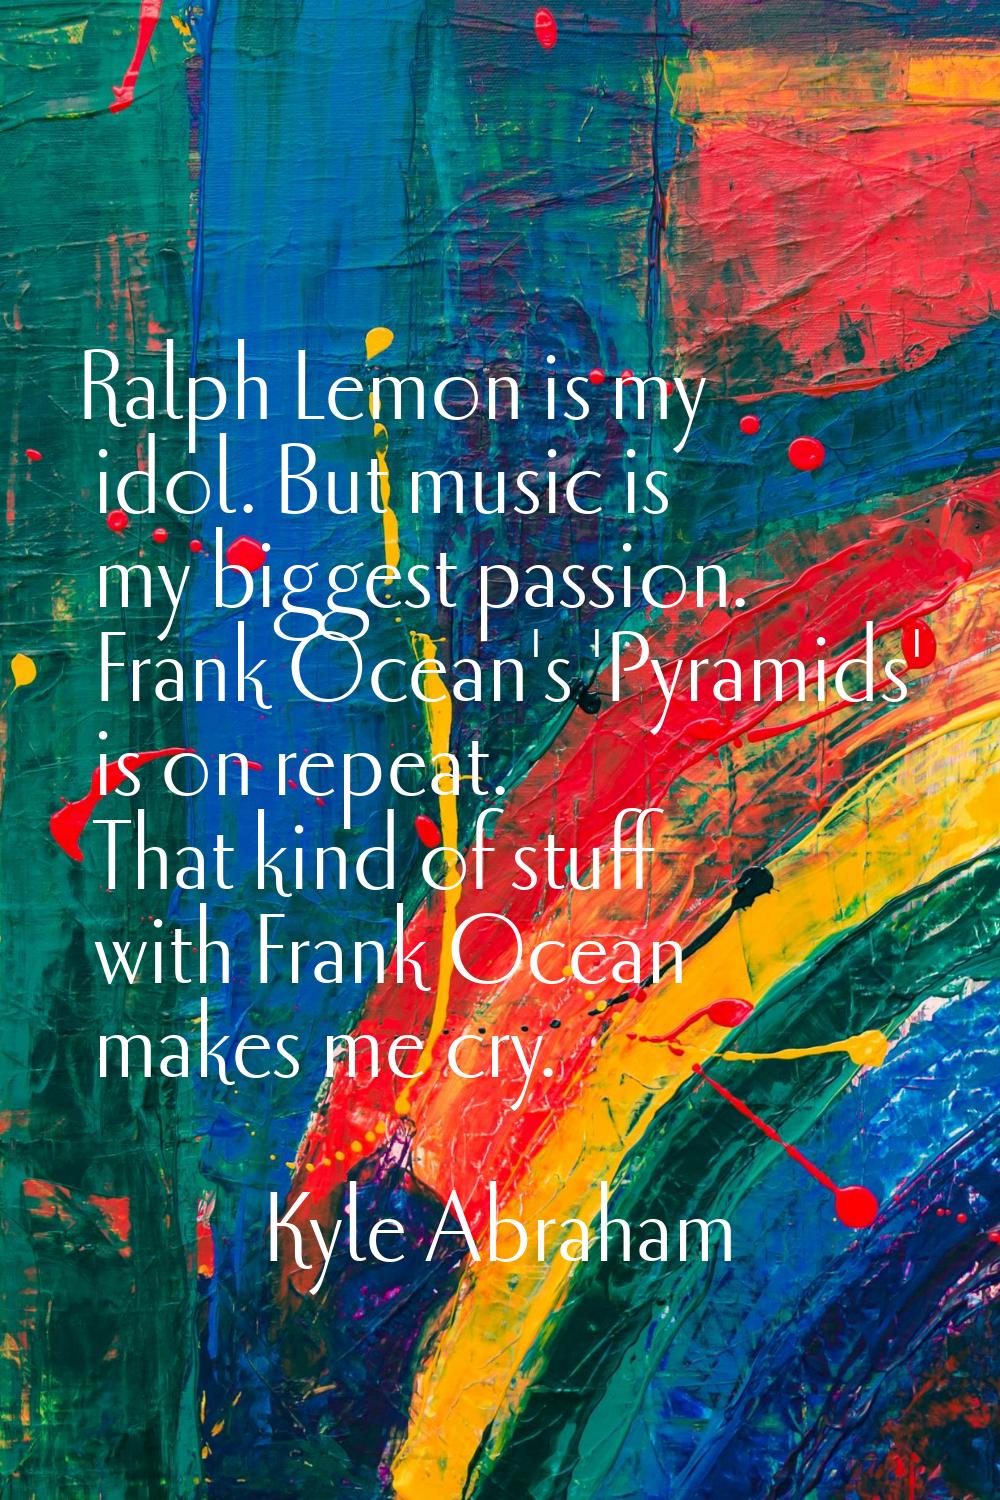 Ralph Lemon is my idol. But music is my biggest passion. Frank Ocean's 'Pyramids' is on repeat. Tha